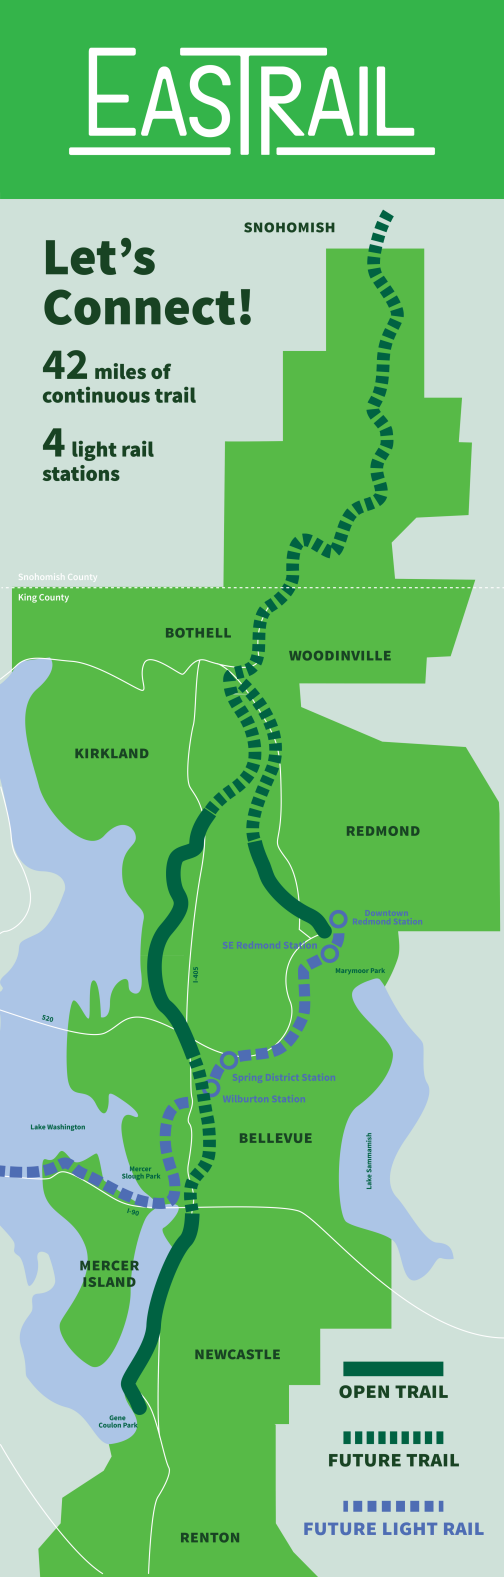 Eastrail Map (click to enlarge)